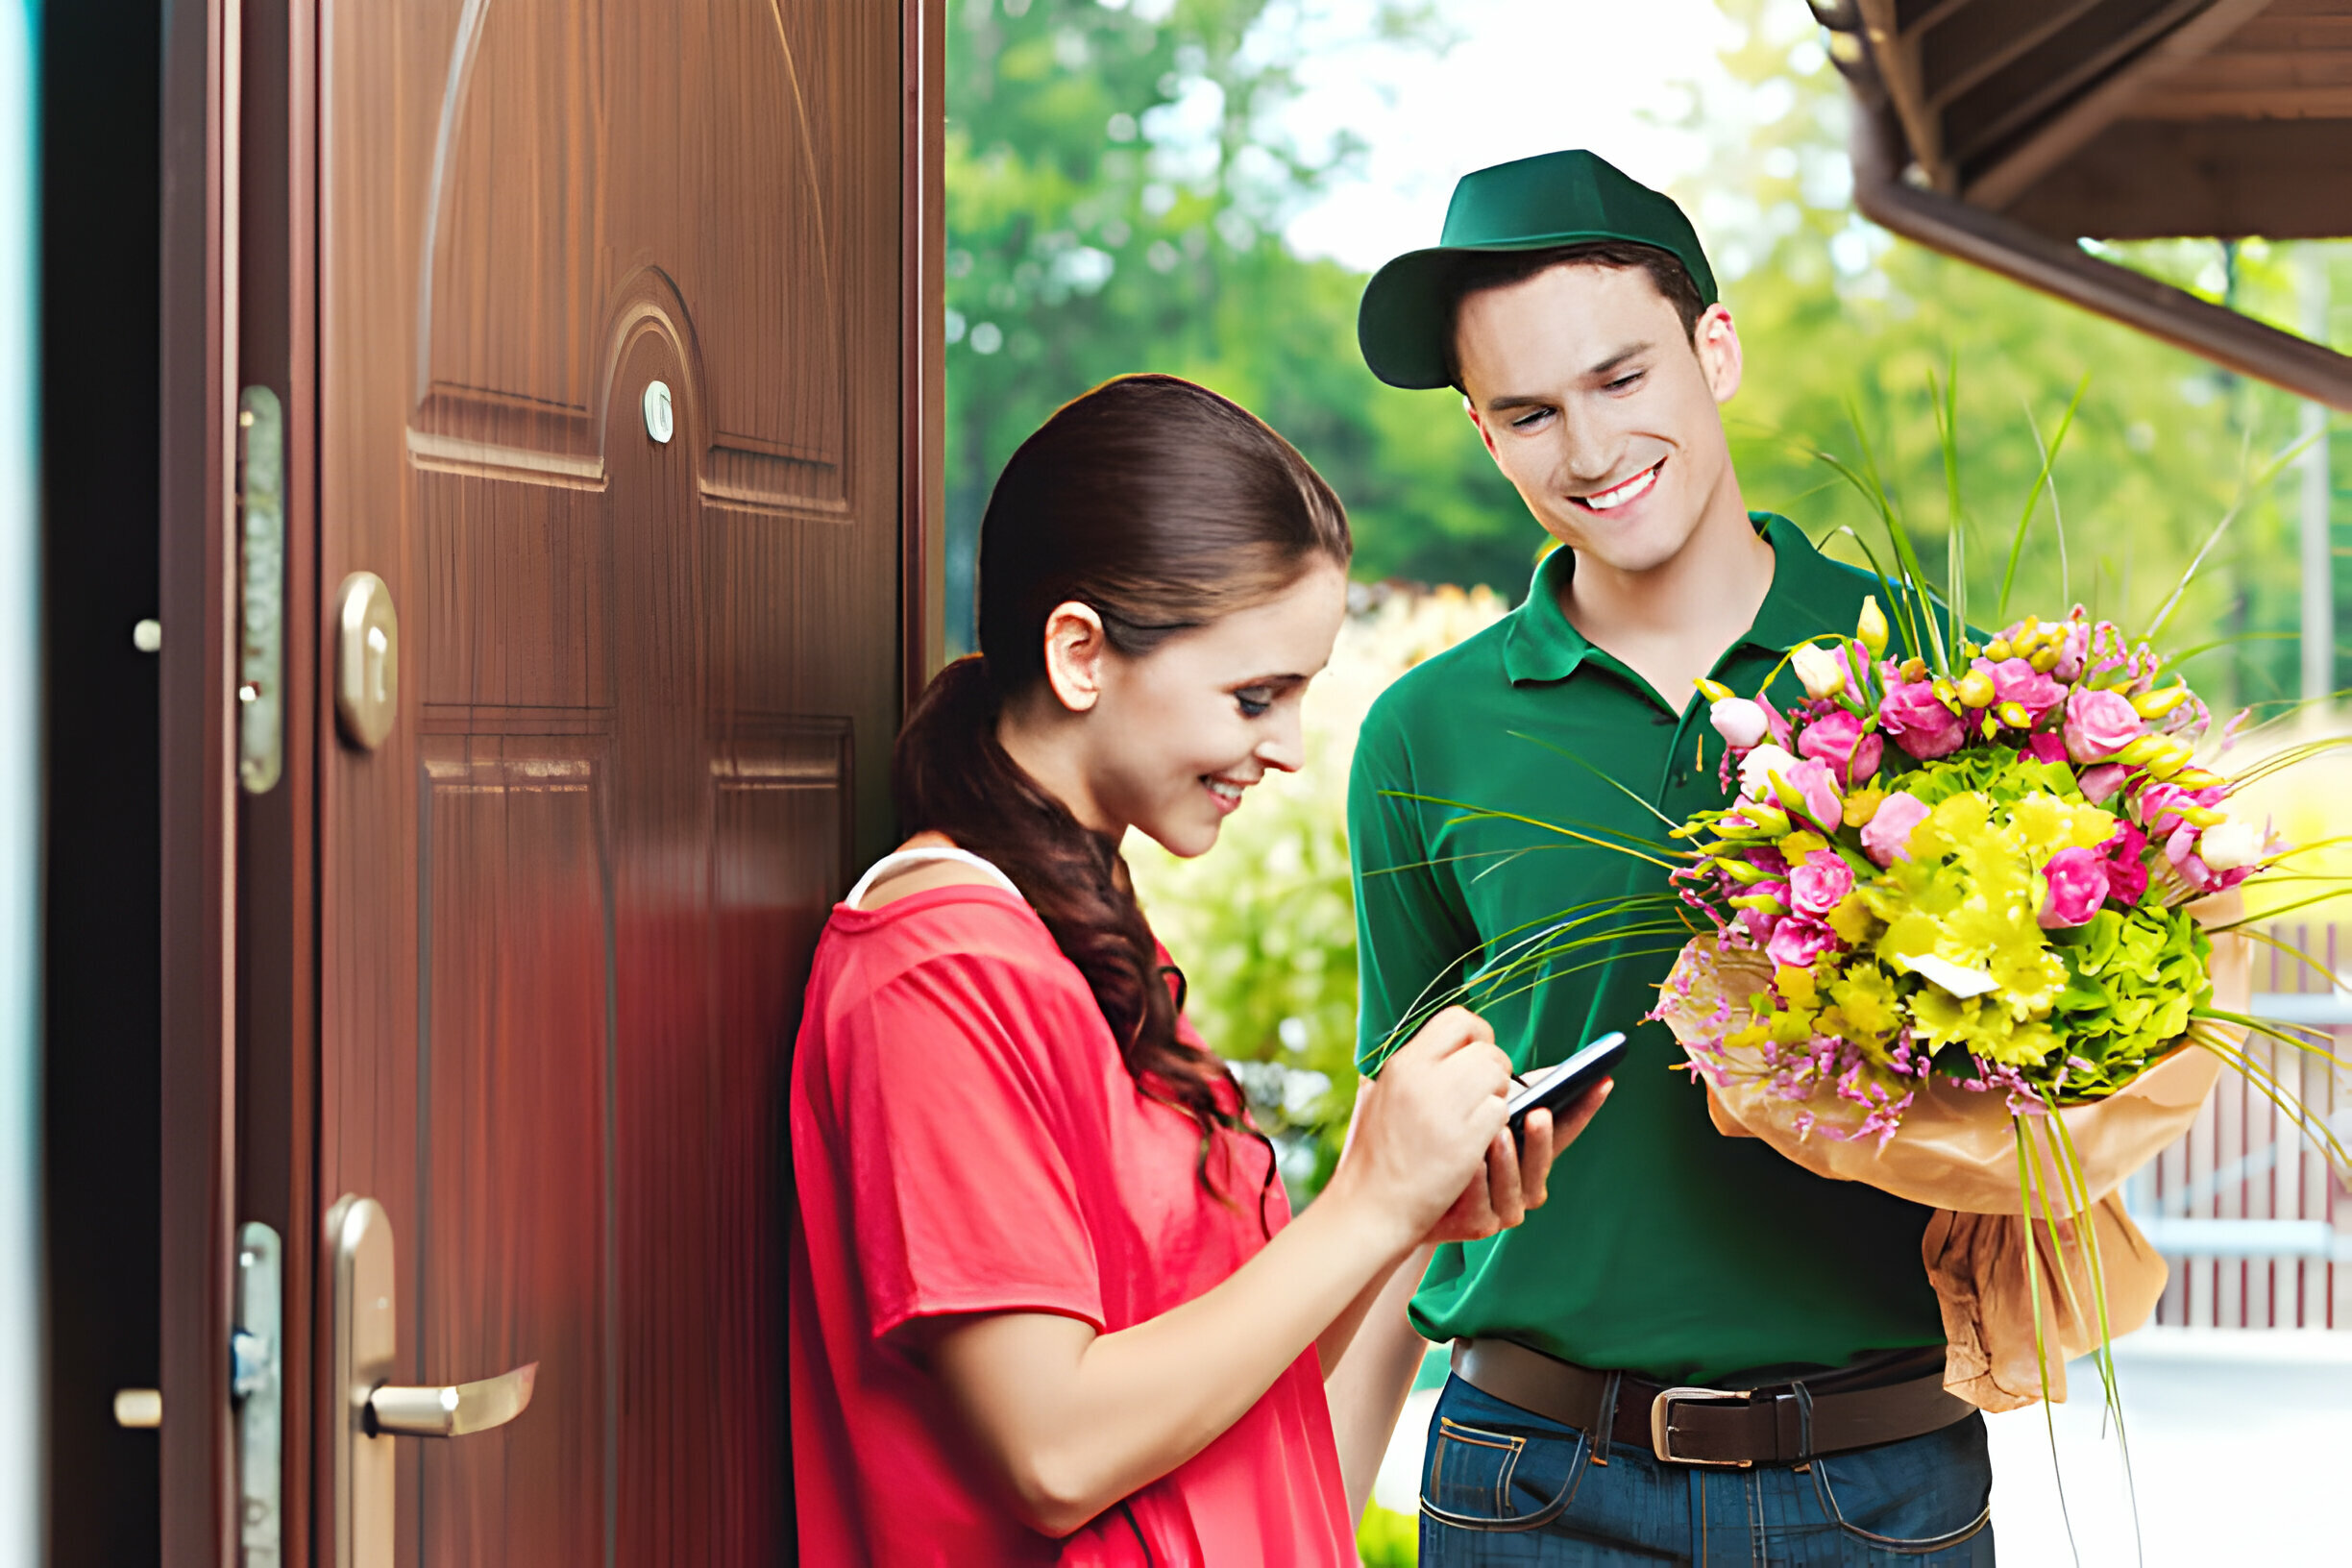 How to Choose the Right Flower Delivery Service